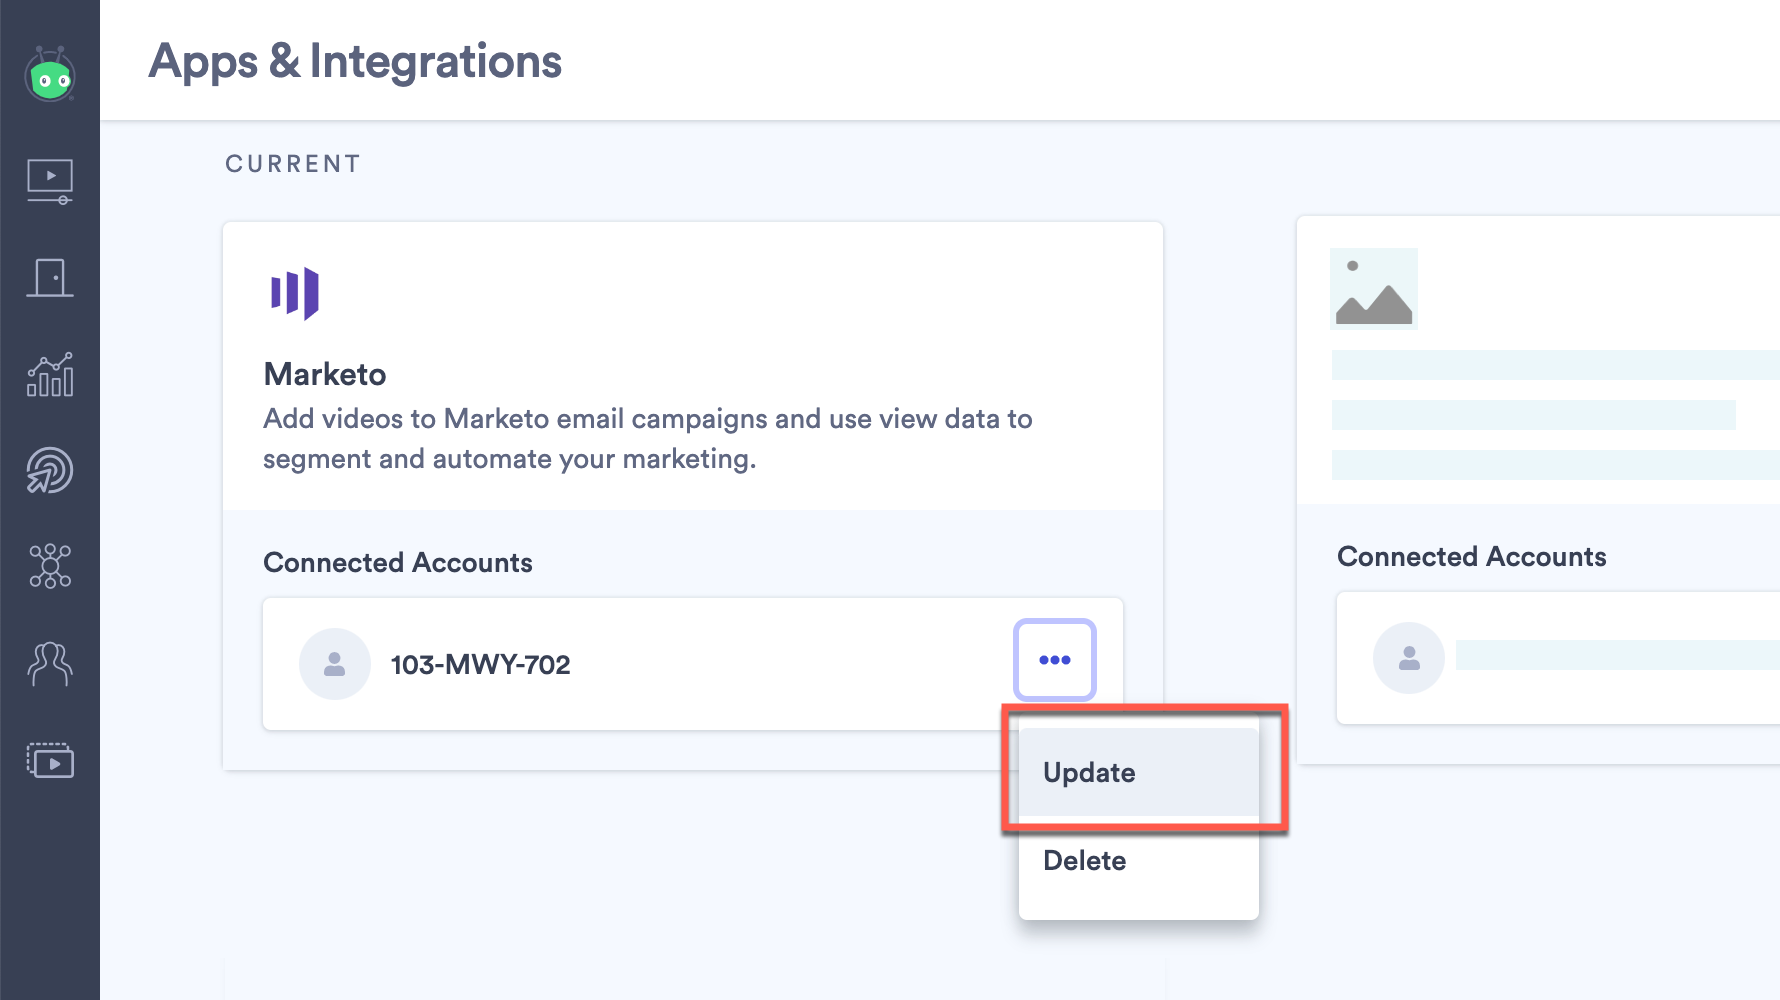 Updating your integration settings for Marketo to allow Vidyard to create new lead records whenever a viewer is identifed that does not already exist in your database